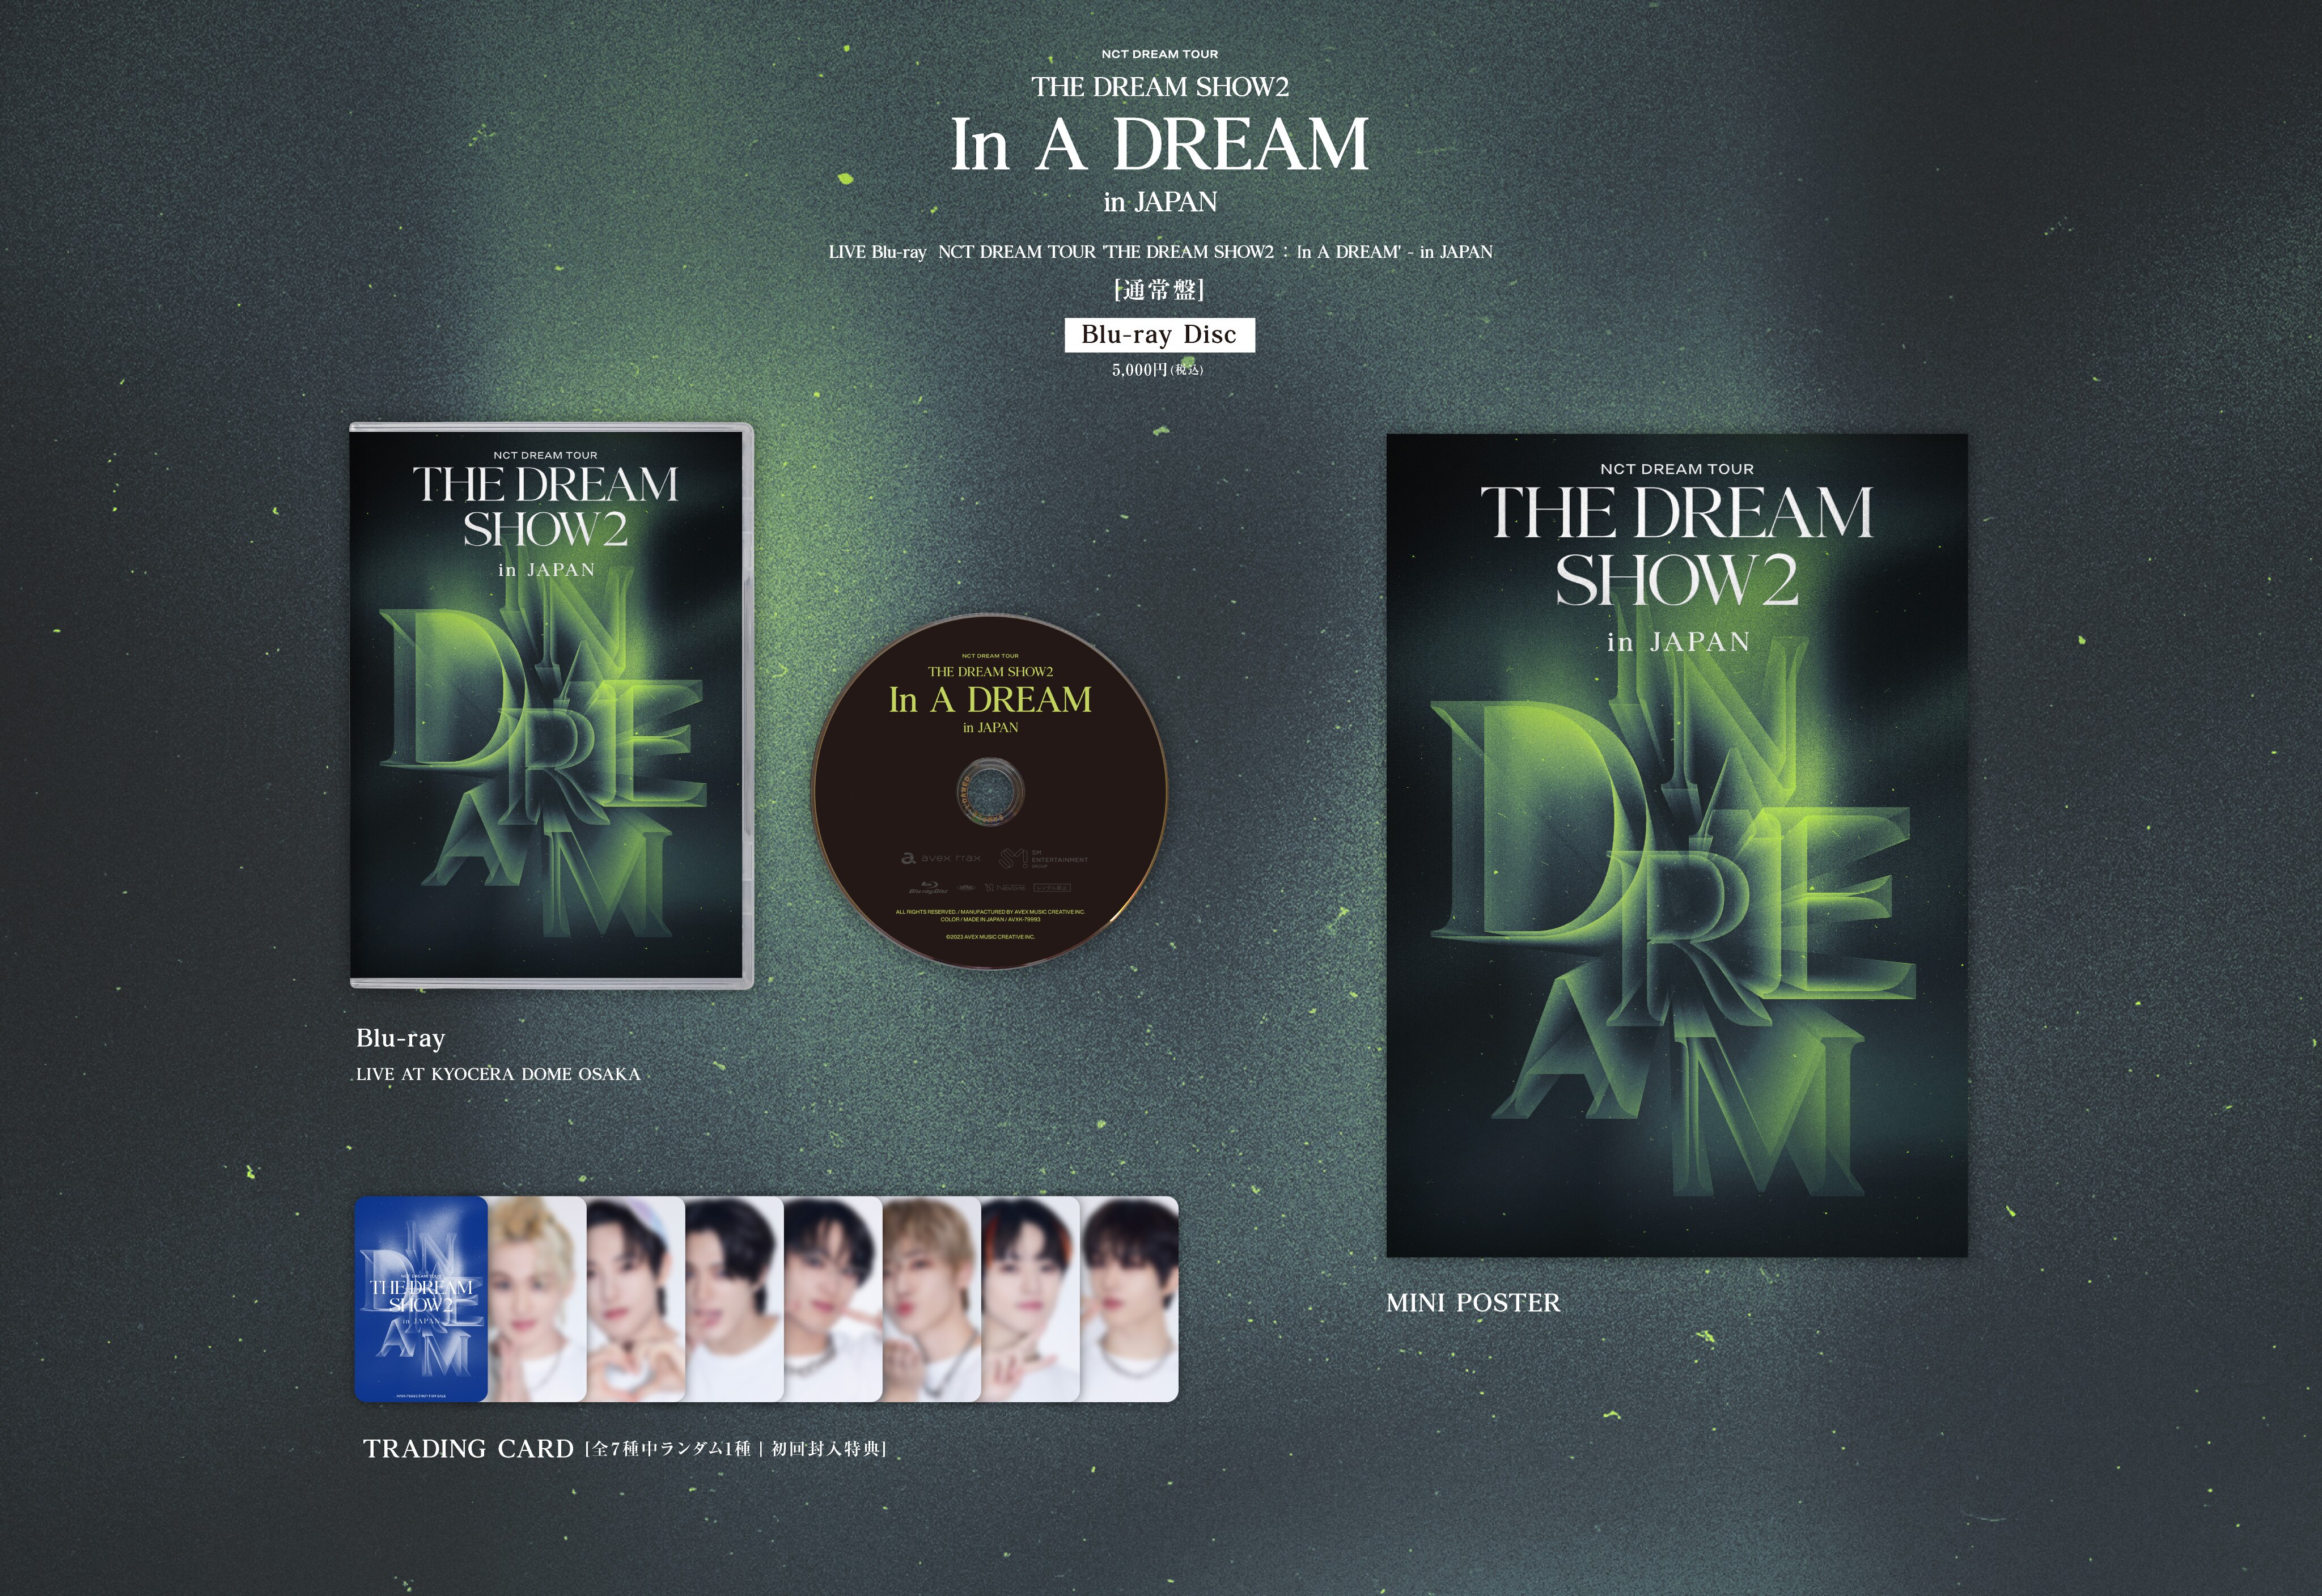 CDDVDNCT DREAM/TOUR'THE DREAM SHOW2:In A DRE… - ミュージック